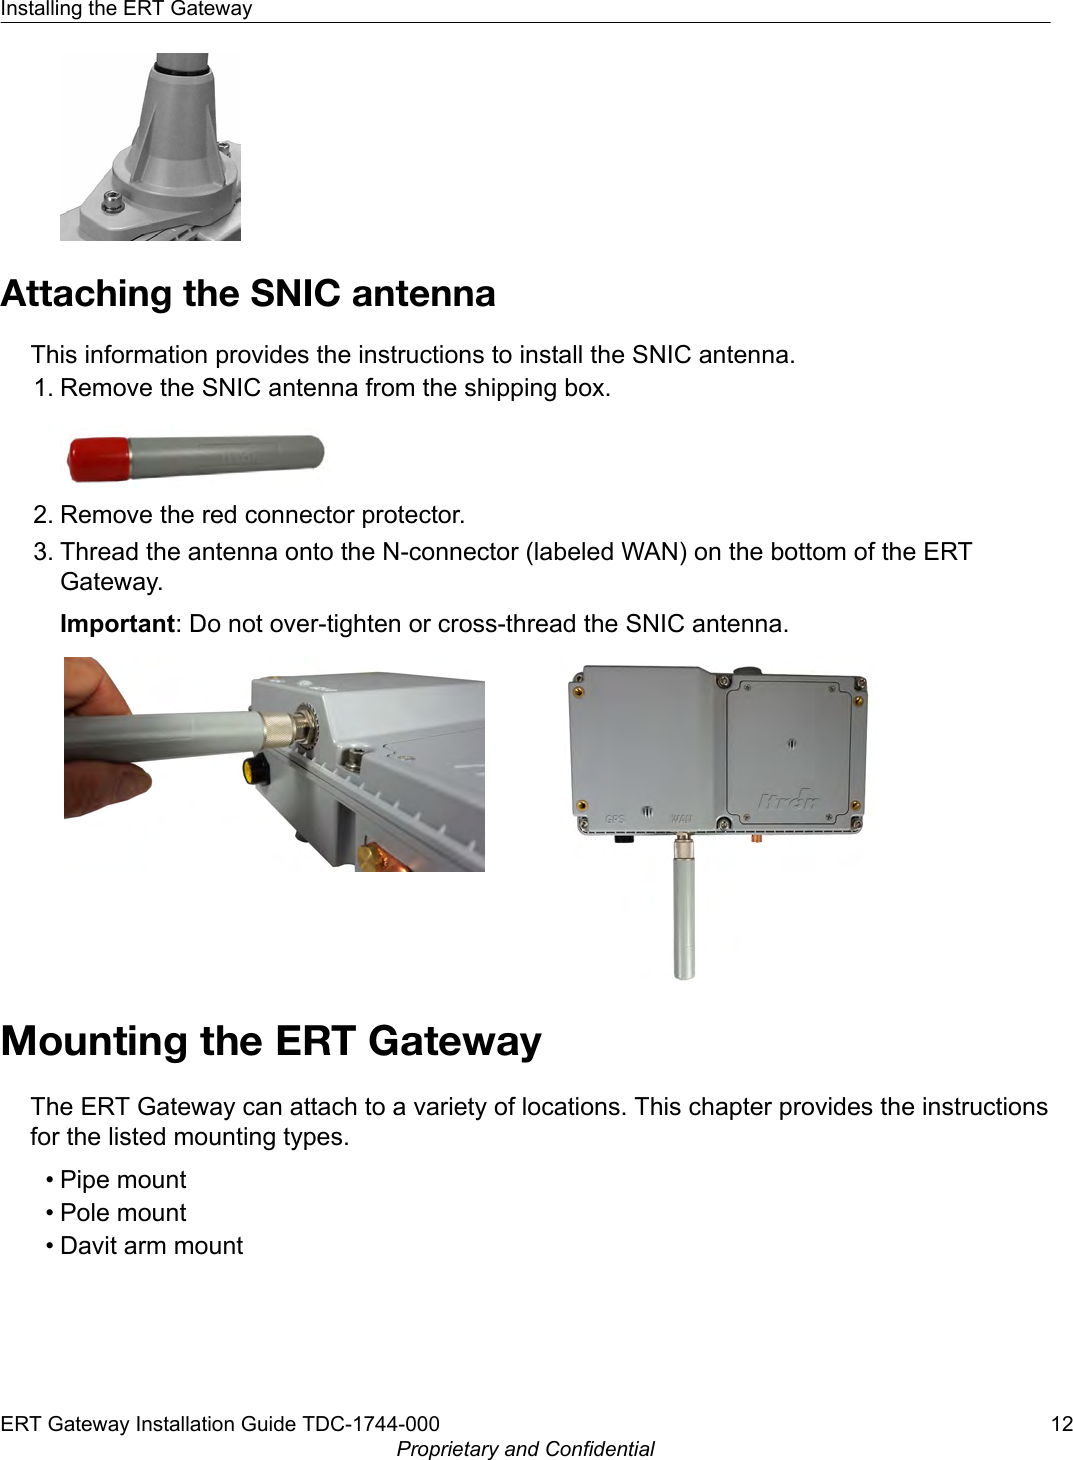 Attaching the SNIC antennaThis information provides the instructions to install the SNIC antenna.1. Remove the SNIC antenna from the shipping box.2. Remove the red connector protector.3. Thread the antenna onto the N-connector (labeled WAN) on the bottom of the ERTGateway.Important: Do not over-tighten or cross-thread the SNIC antenna.Mounting the ERT GatewayThe ERT Gateway can attach to a variety of locations. This chapter provides the instructionsfor the listed mounting types.• Pipe mount• Pole mount• Davit arm mountInstalling the ERT GatewayERT Gateway Installation Guide TDC-1744-000 12Proprietary and Confidential